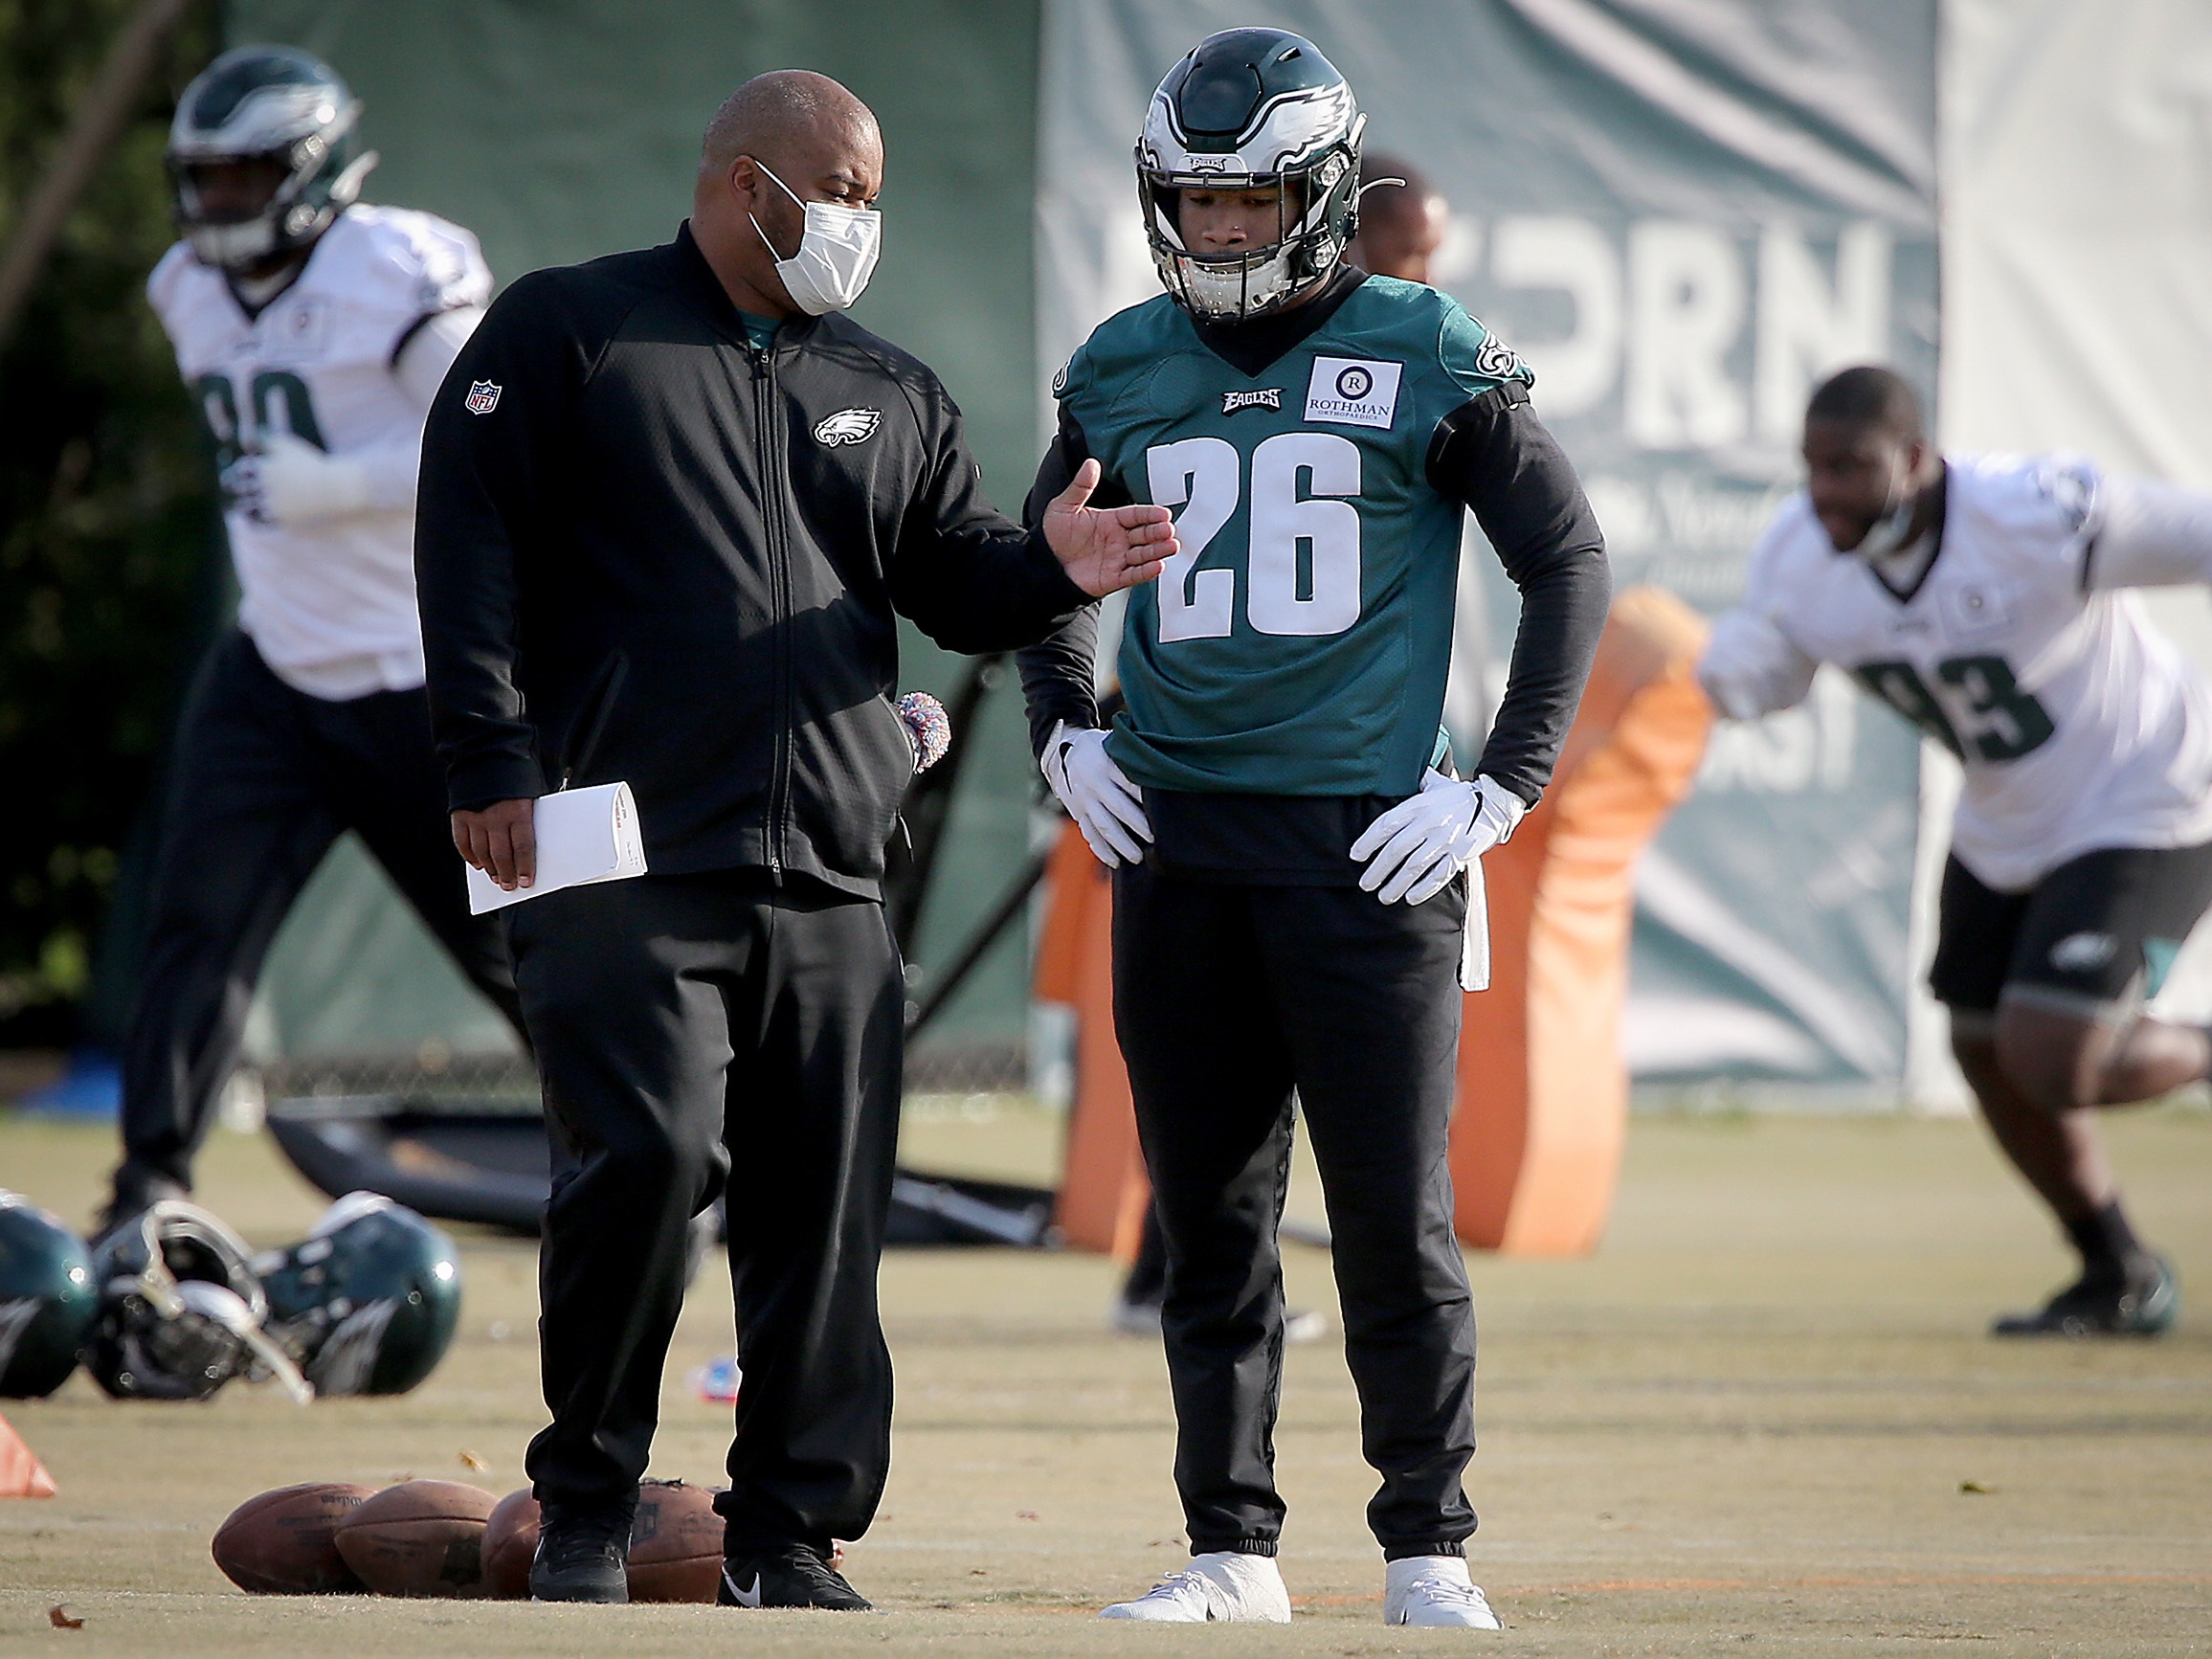 Duce Staley interviewing with Eagles today for head coaching job – NBC  Sports Philadelphia